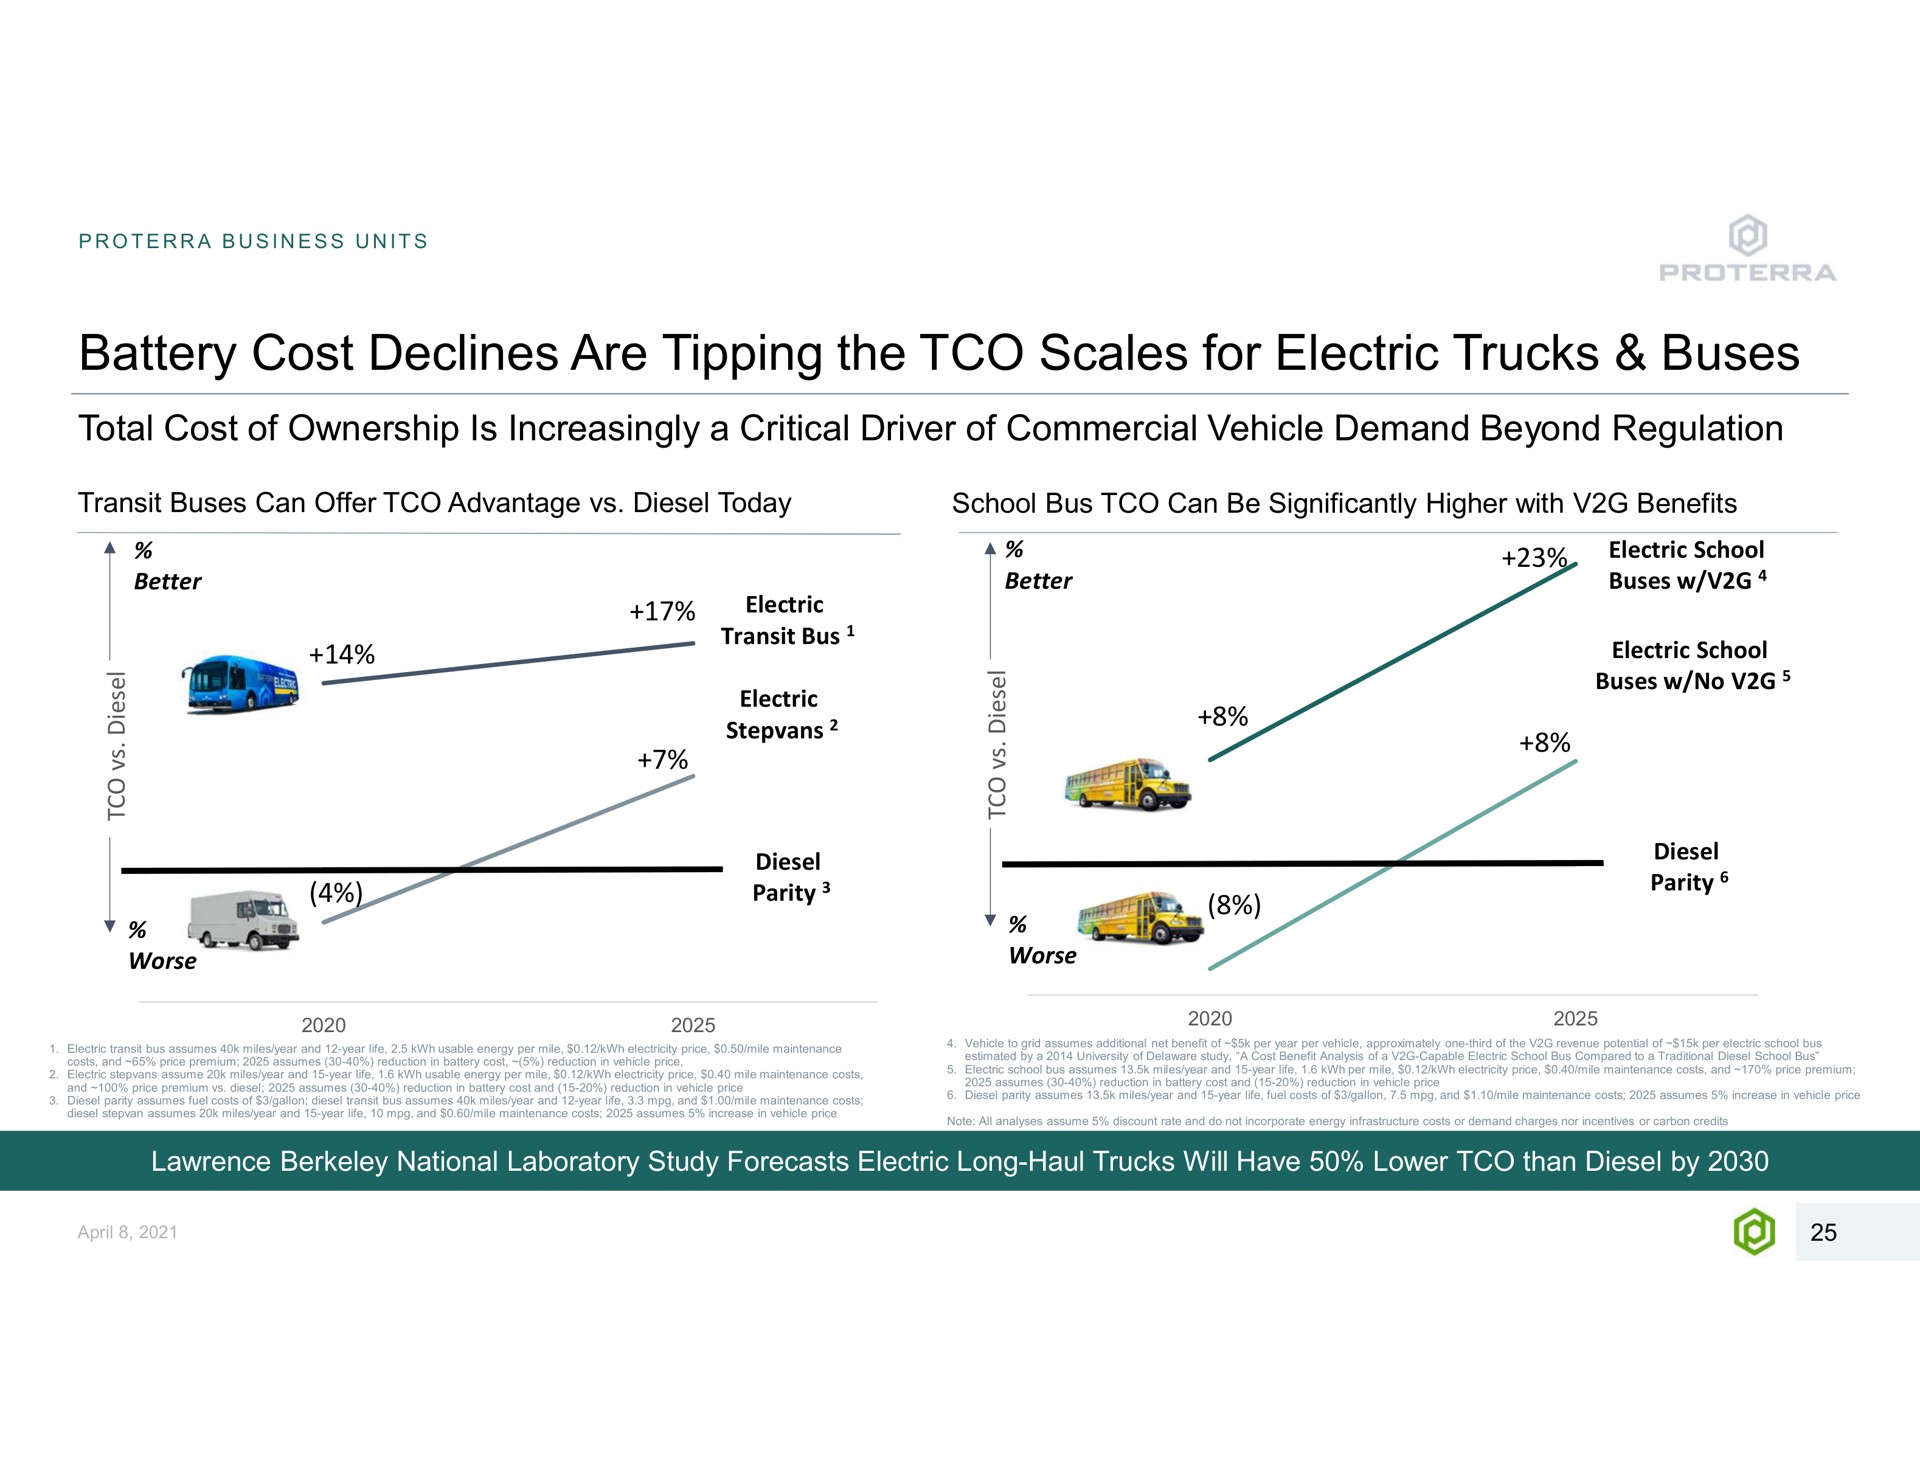 battery cost declines are tipping the scales for electric trucks buses business units total of ownership is increasingly a critical driver of commercial vehicle demand beyond regulation transit can offer advantage diesel today school bus can be significantly higher with benefits to a better a i or worse transit bus diesel parity better school school no diesel i parity transit price usable energy per mile usable energy per ion in sit bus assumes miles price mile maintenance costs mile maintenance costs electricity price mile maintenance per mile electricity price gallon and mile maintenance costs assumes increase in vehicle price energy infrastructure costs or demand charges nor incentives or carbon credits | Proterra